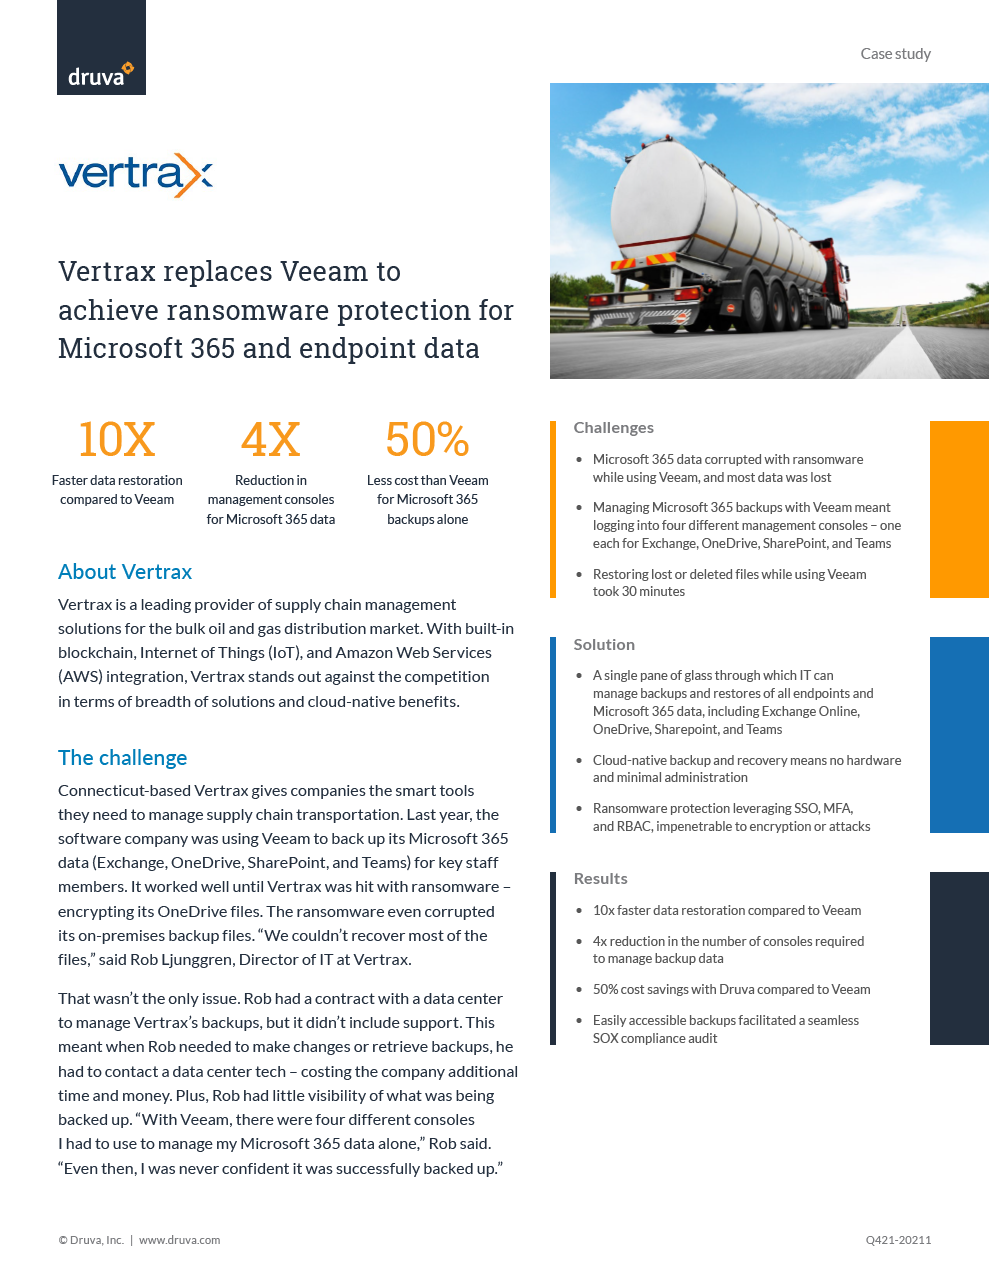 Vertrax replaces Veeam for Microsoft 365 ransomware protection